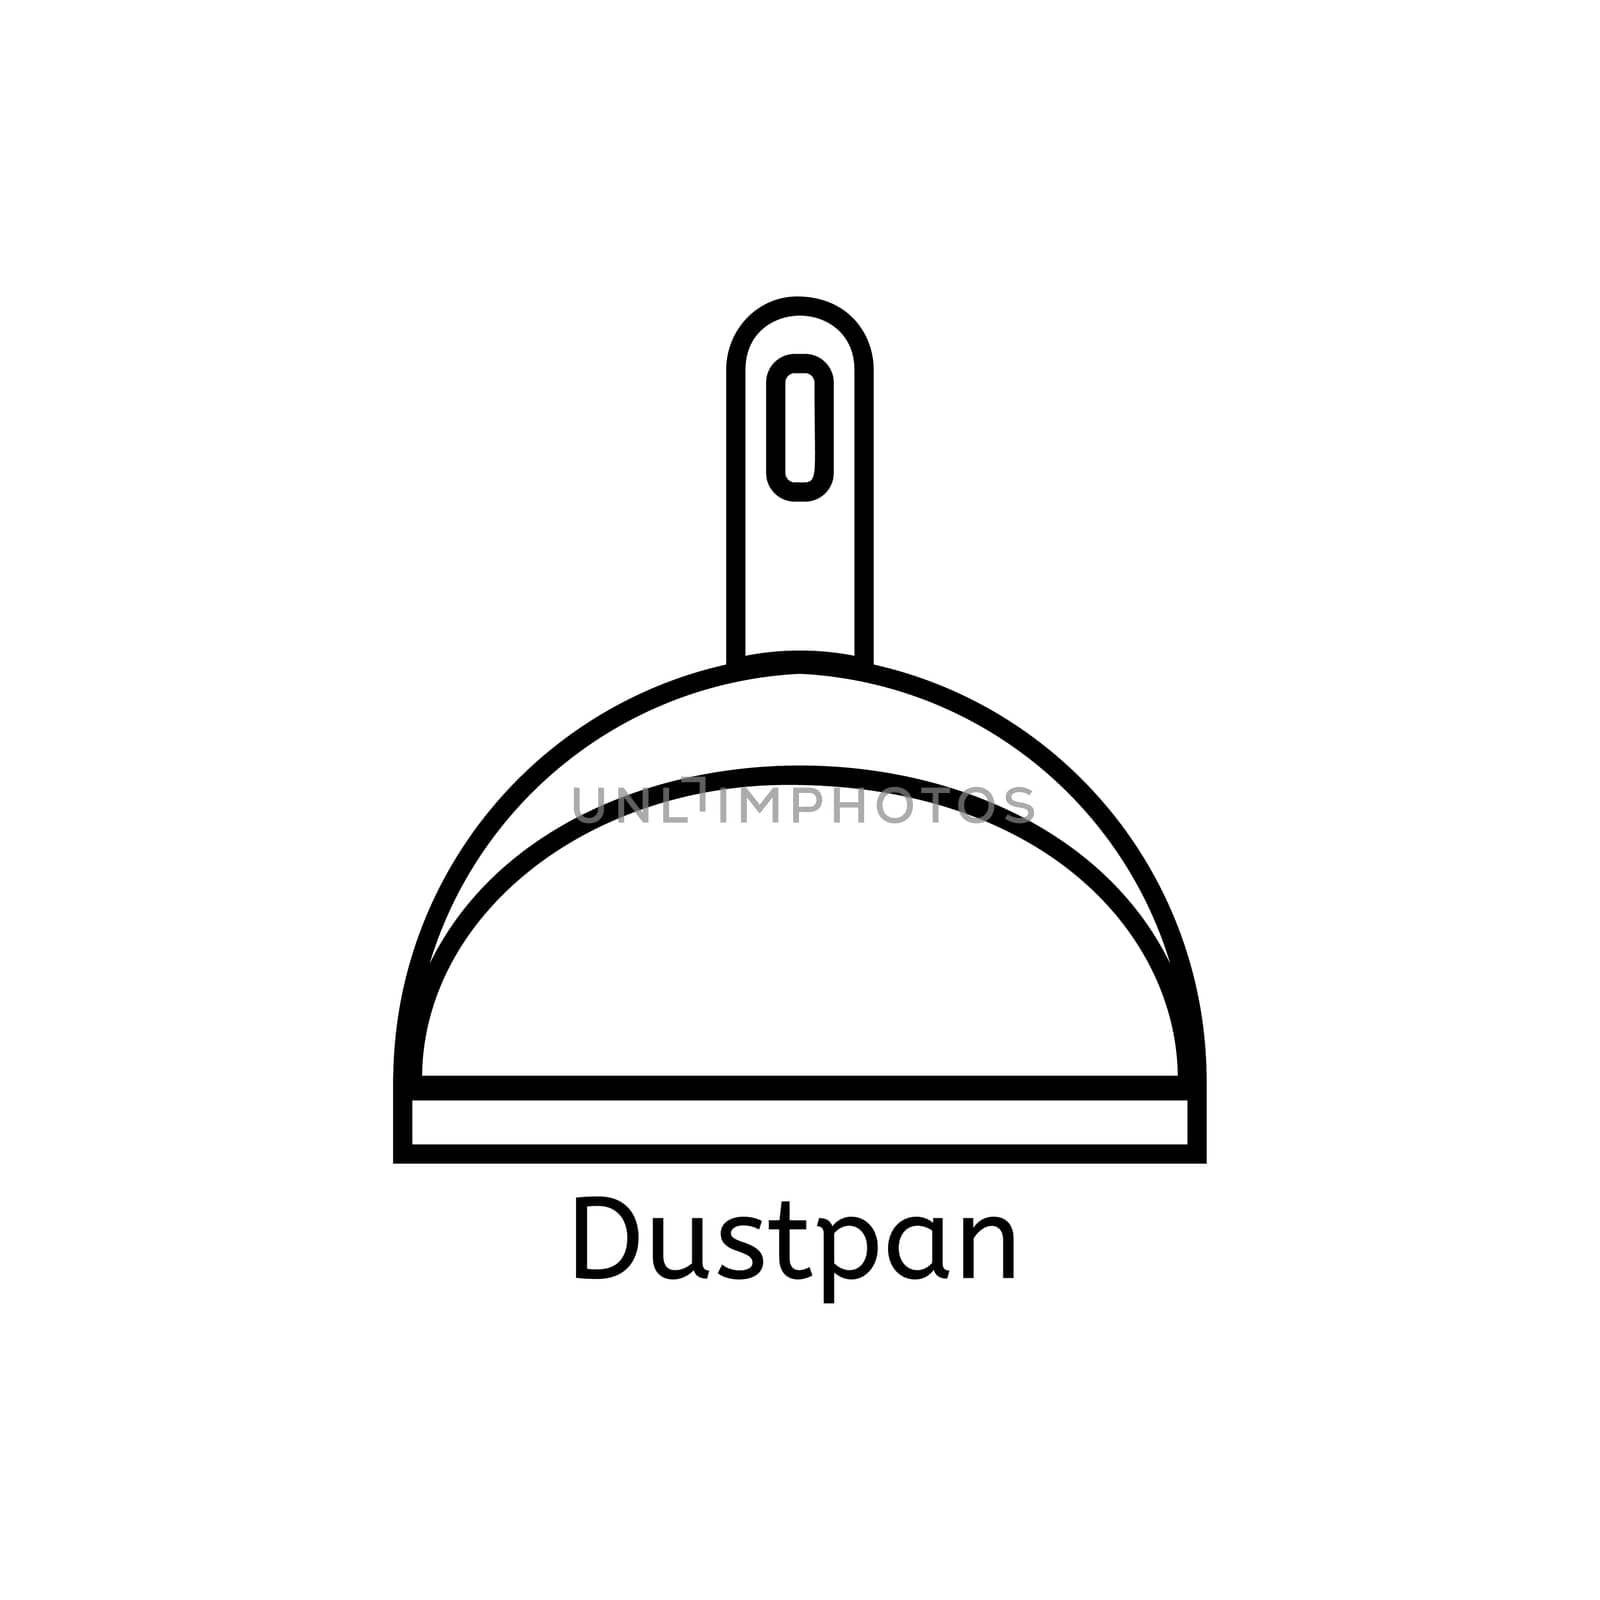 Dustpan simple line icon. Cleaning thin linear signs. Simple concept for websites, infographic, mobile applications. by Elena_Garder